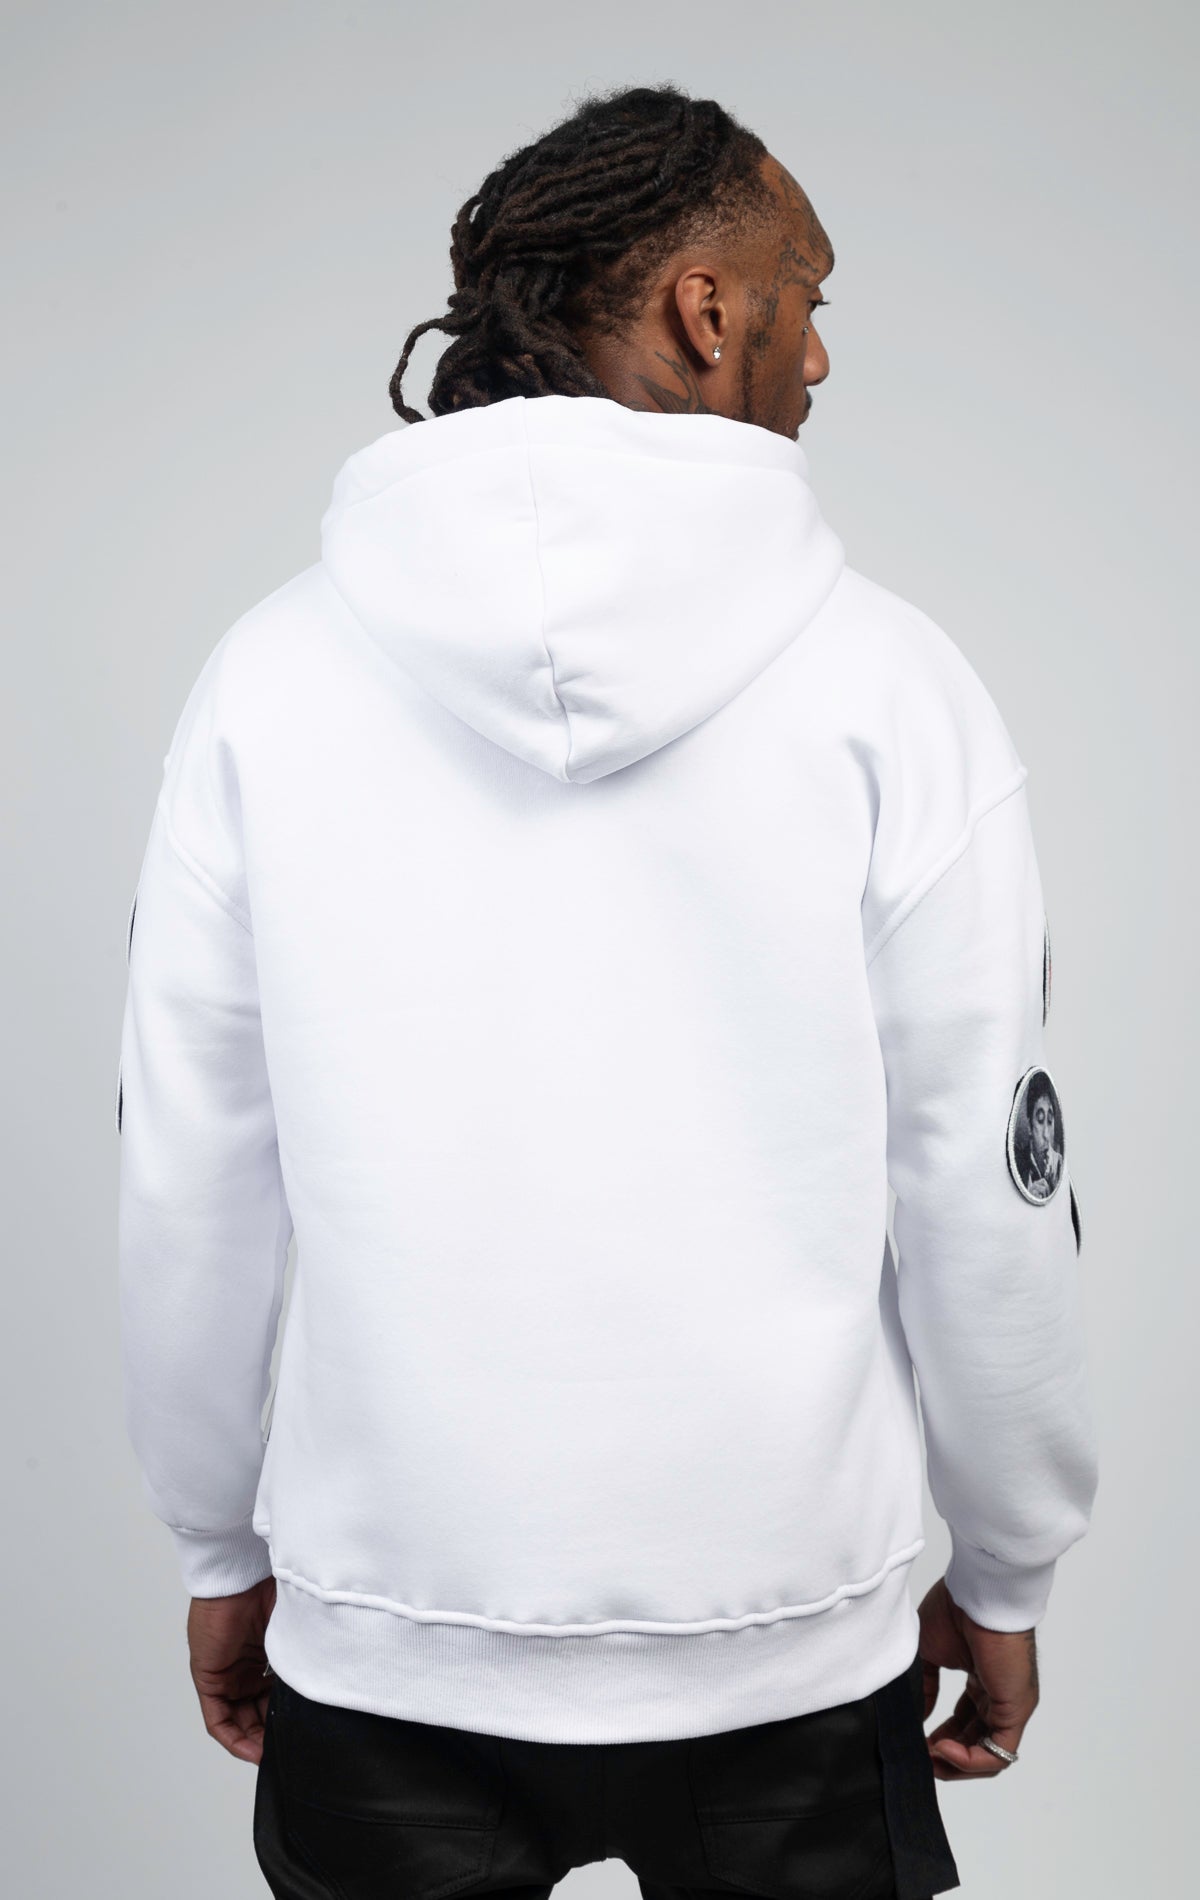 My icon white hoodie with interchangeable patches